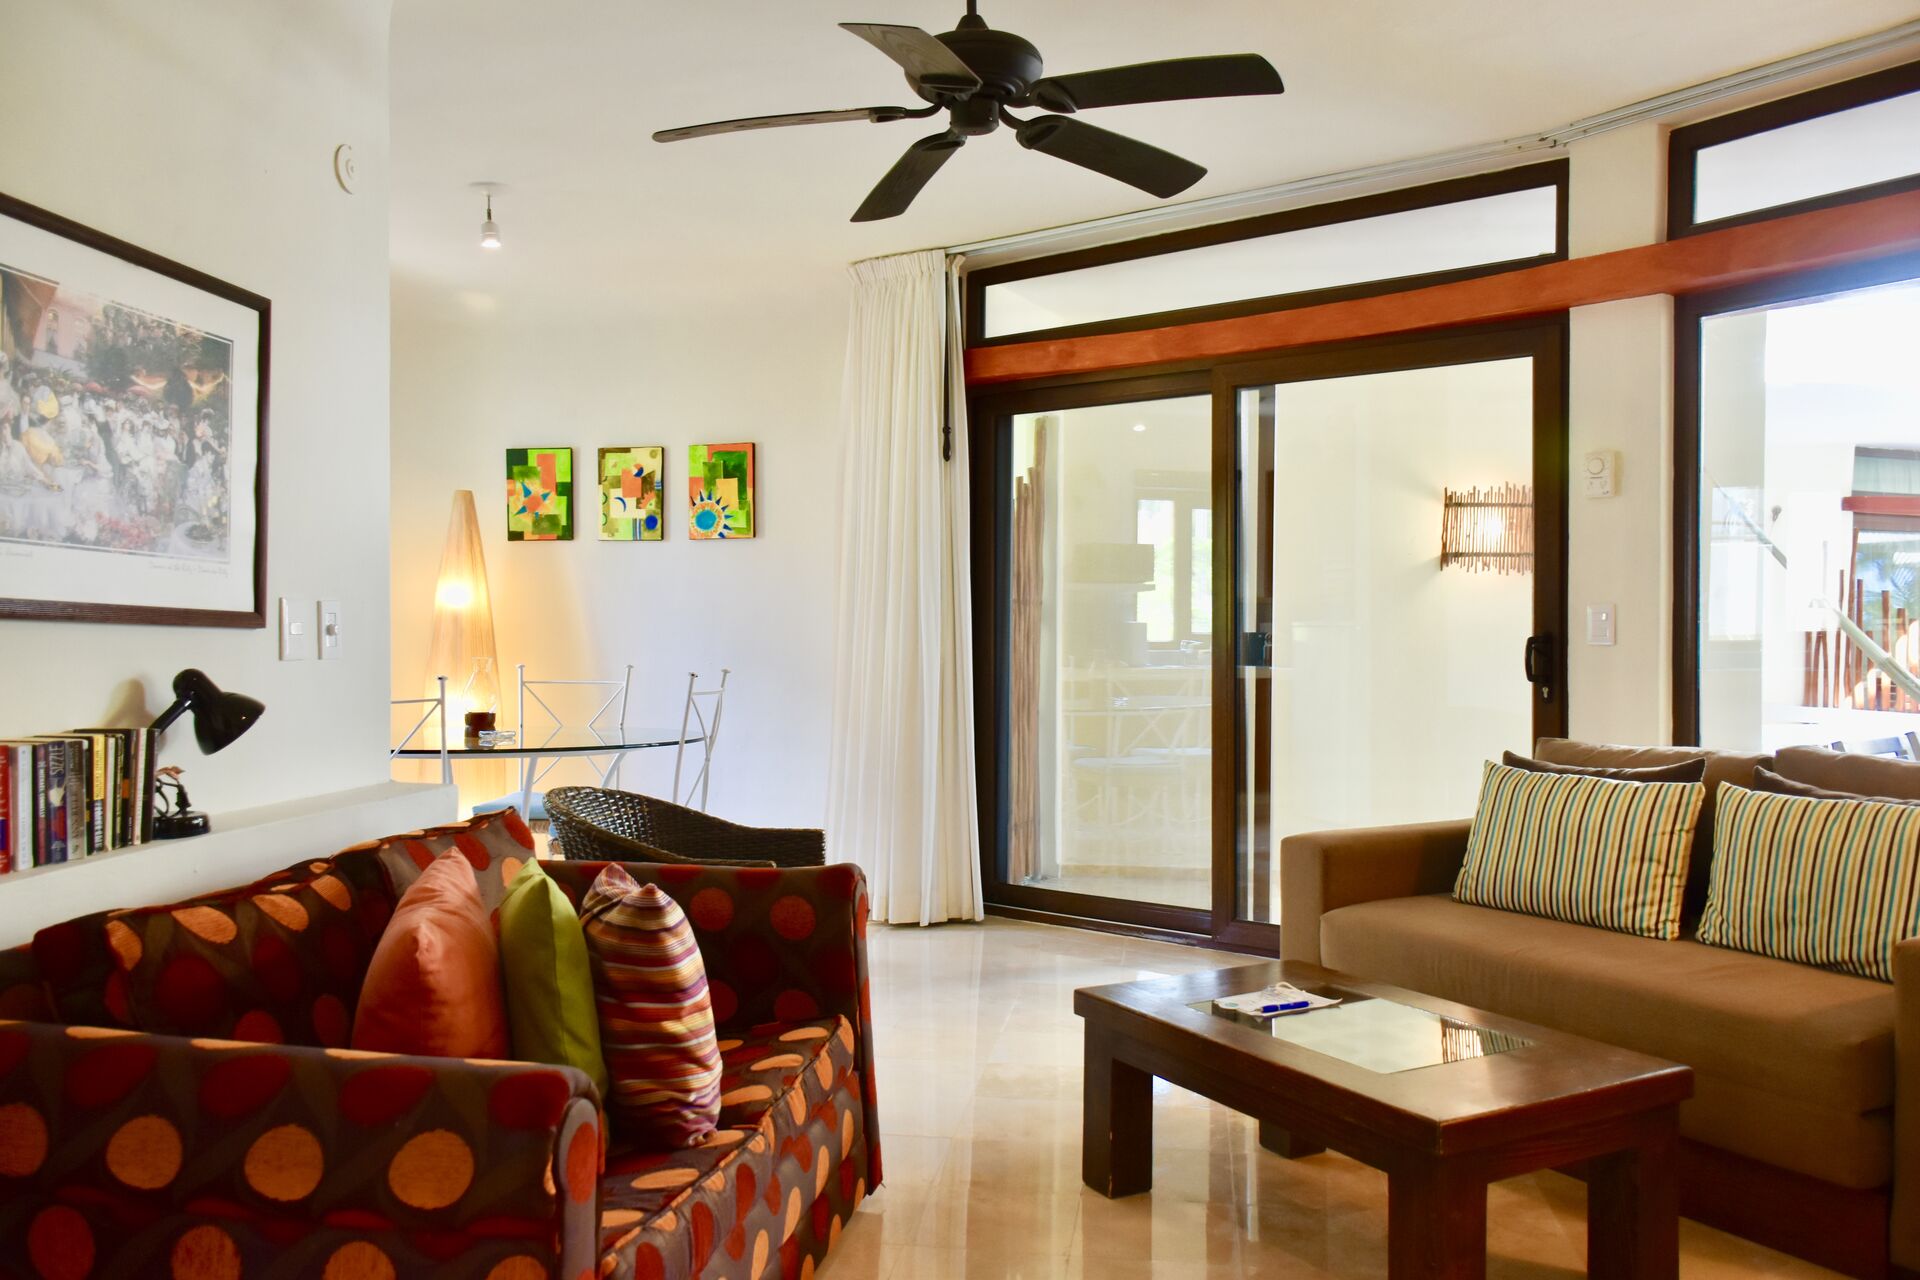 Playa Palms Beach Hotel, amazing 1 bedroom suite with two queen size beds and kitchenette.